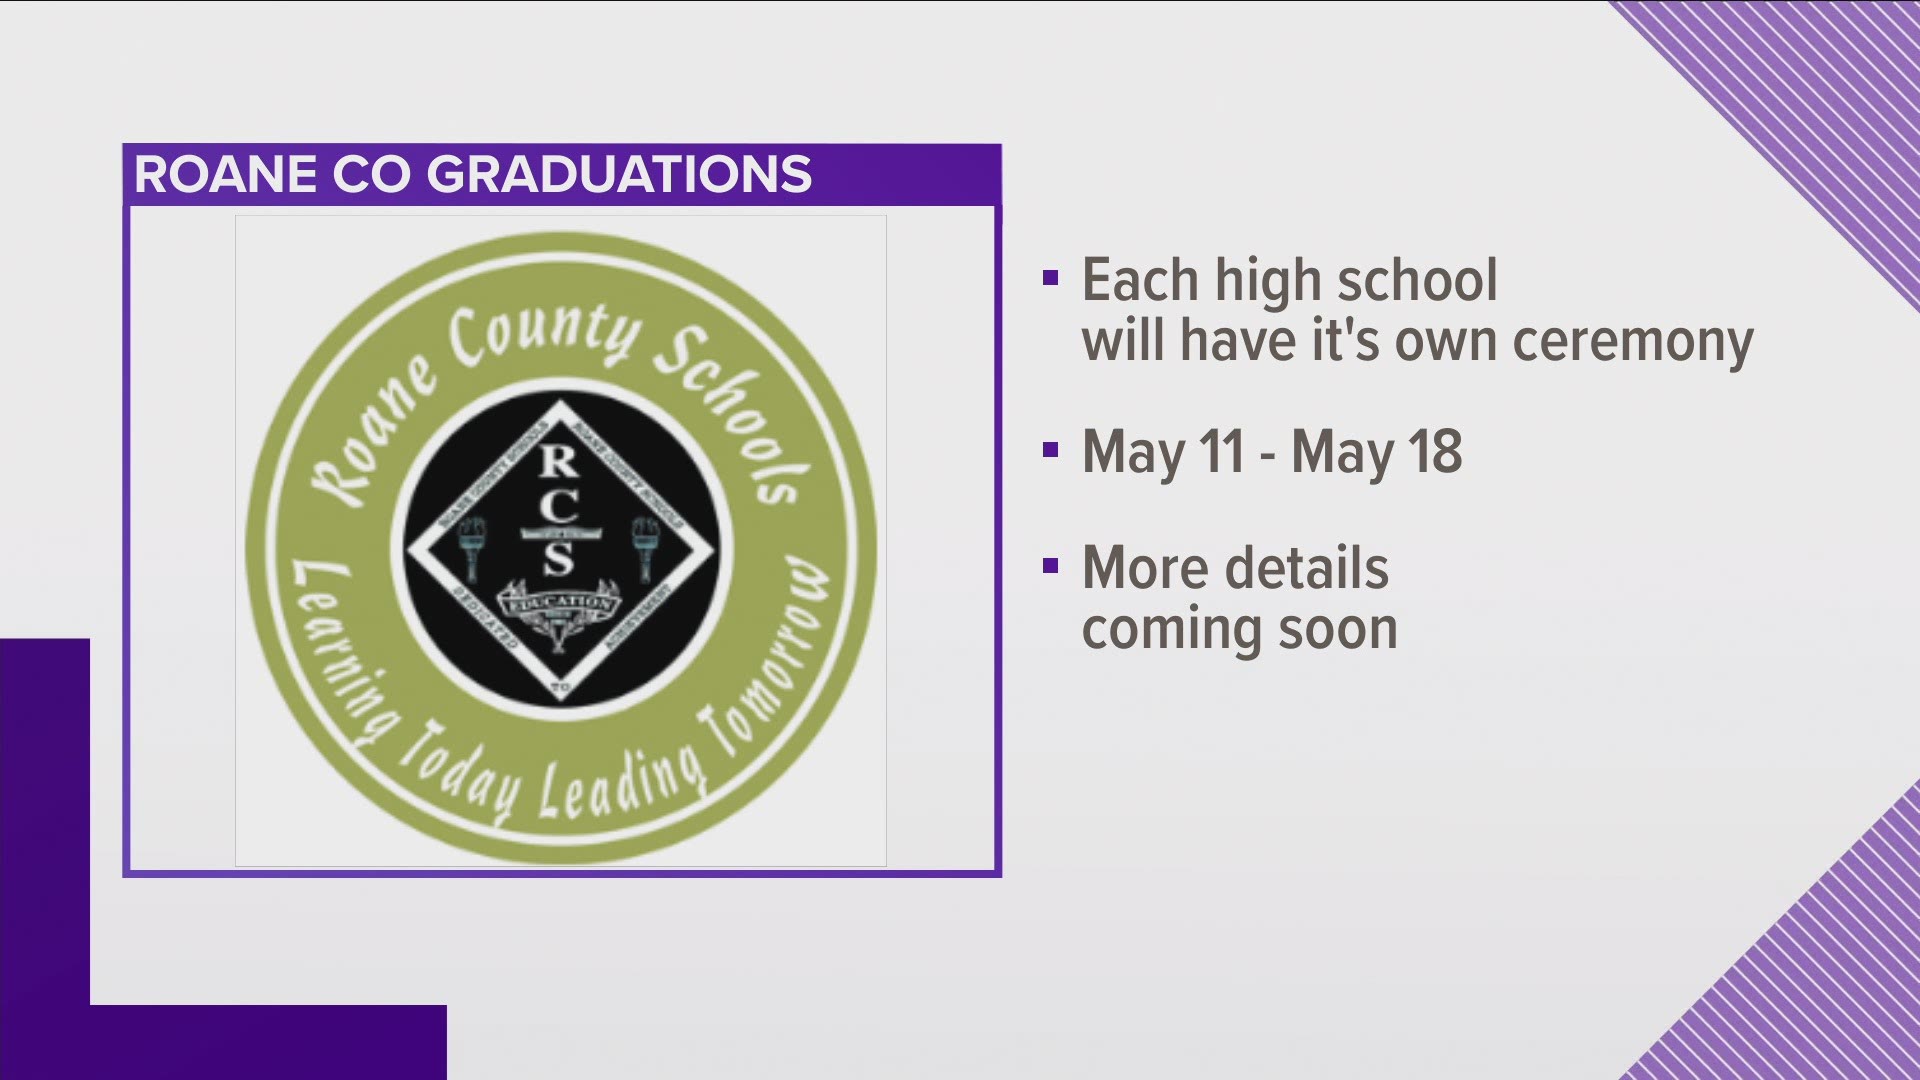 Each high school will have its own ceremony starting Tuesday, May 11 through May 18.